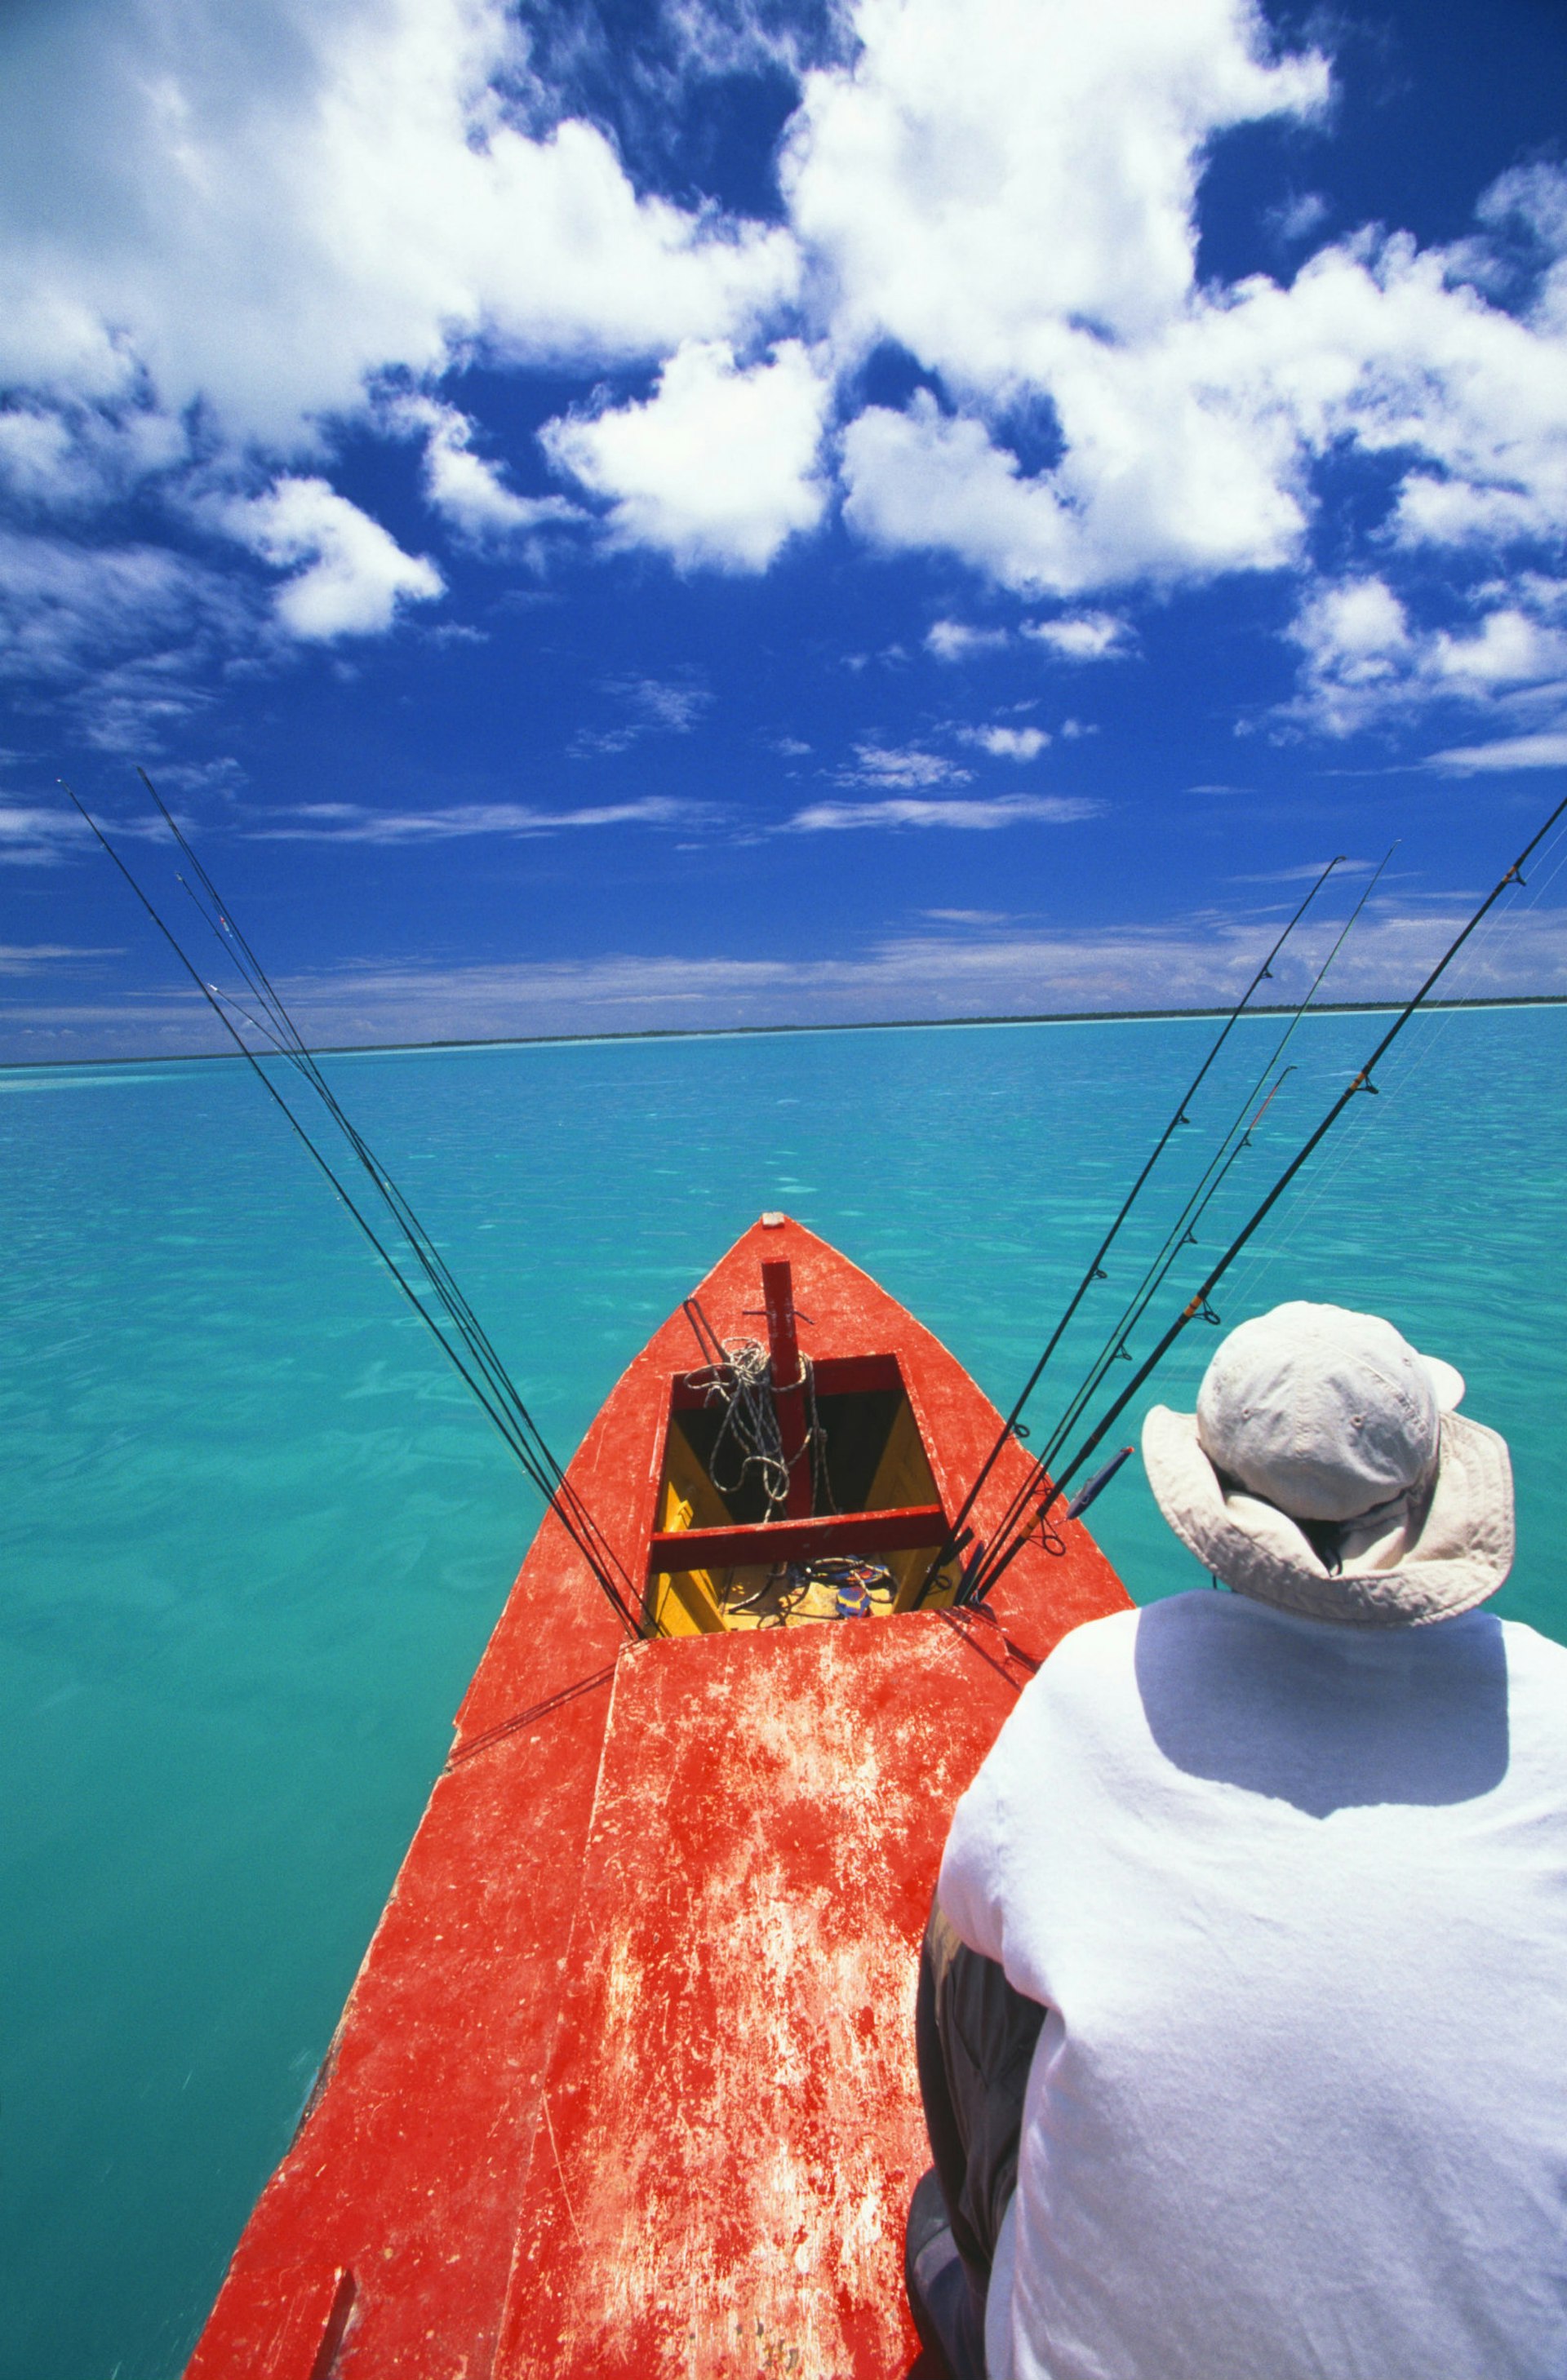 A fisherman sails through turquoise waters in Kiribati © Ron Dahlquist / Getty Images